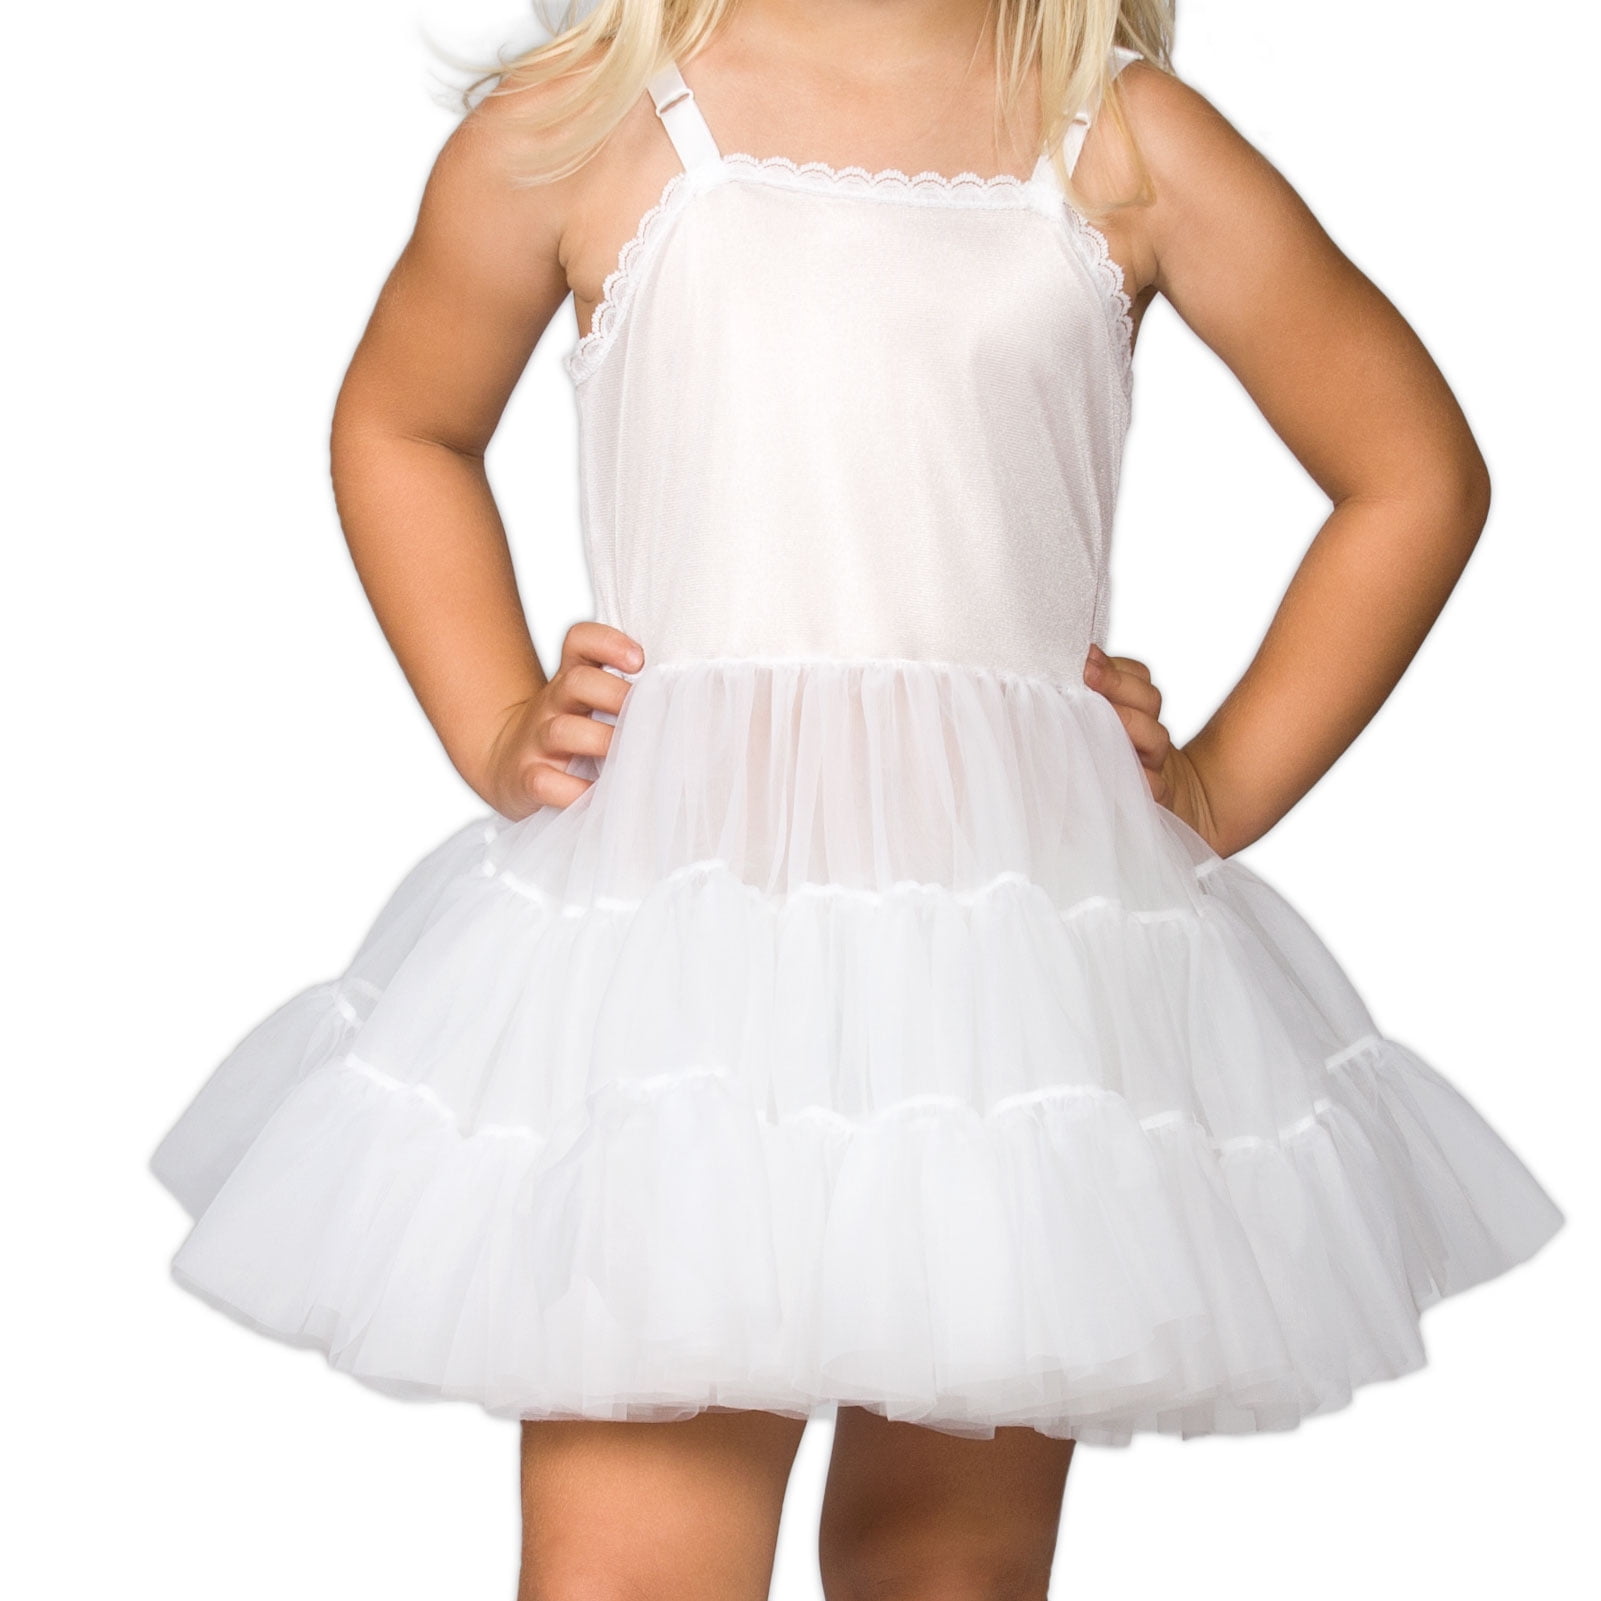 L C Boutique Girls Full Slip with Sweetheart Neckline and Adjustable Straps in Sizes 2T to 14 